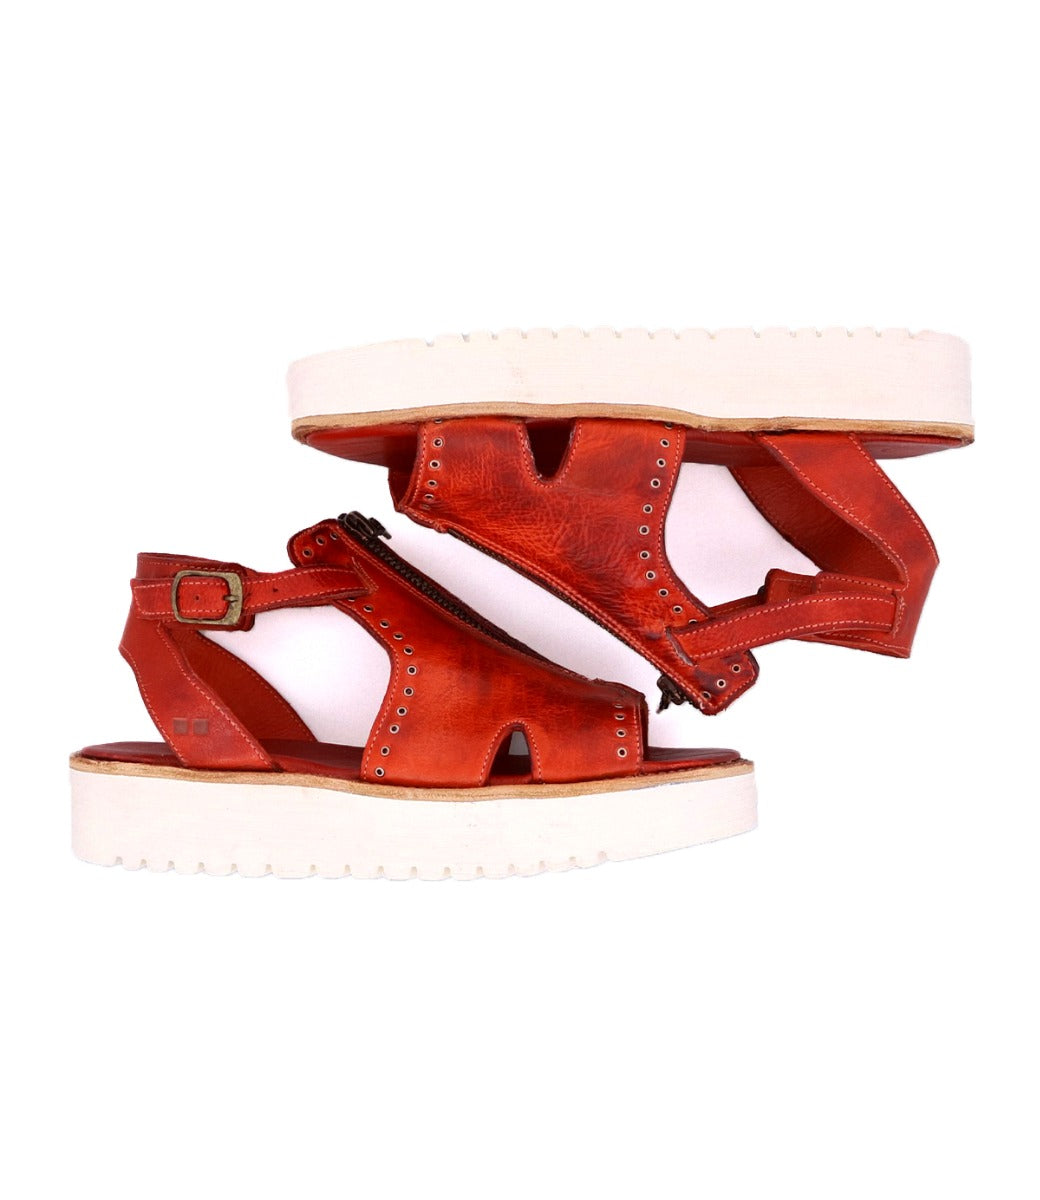 A pair of Clancy red sandals with white soles from Bed Stu.